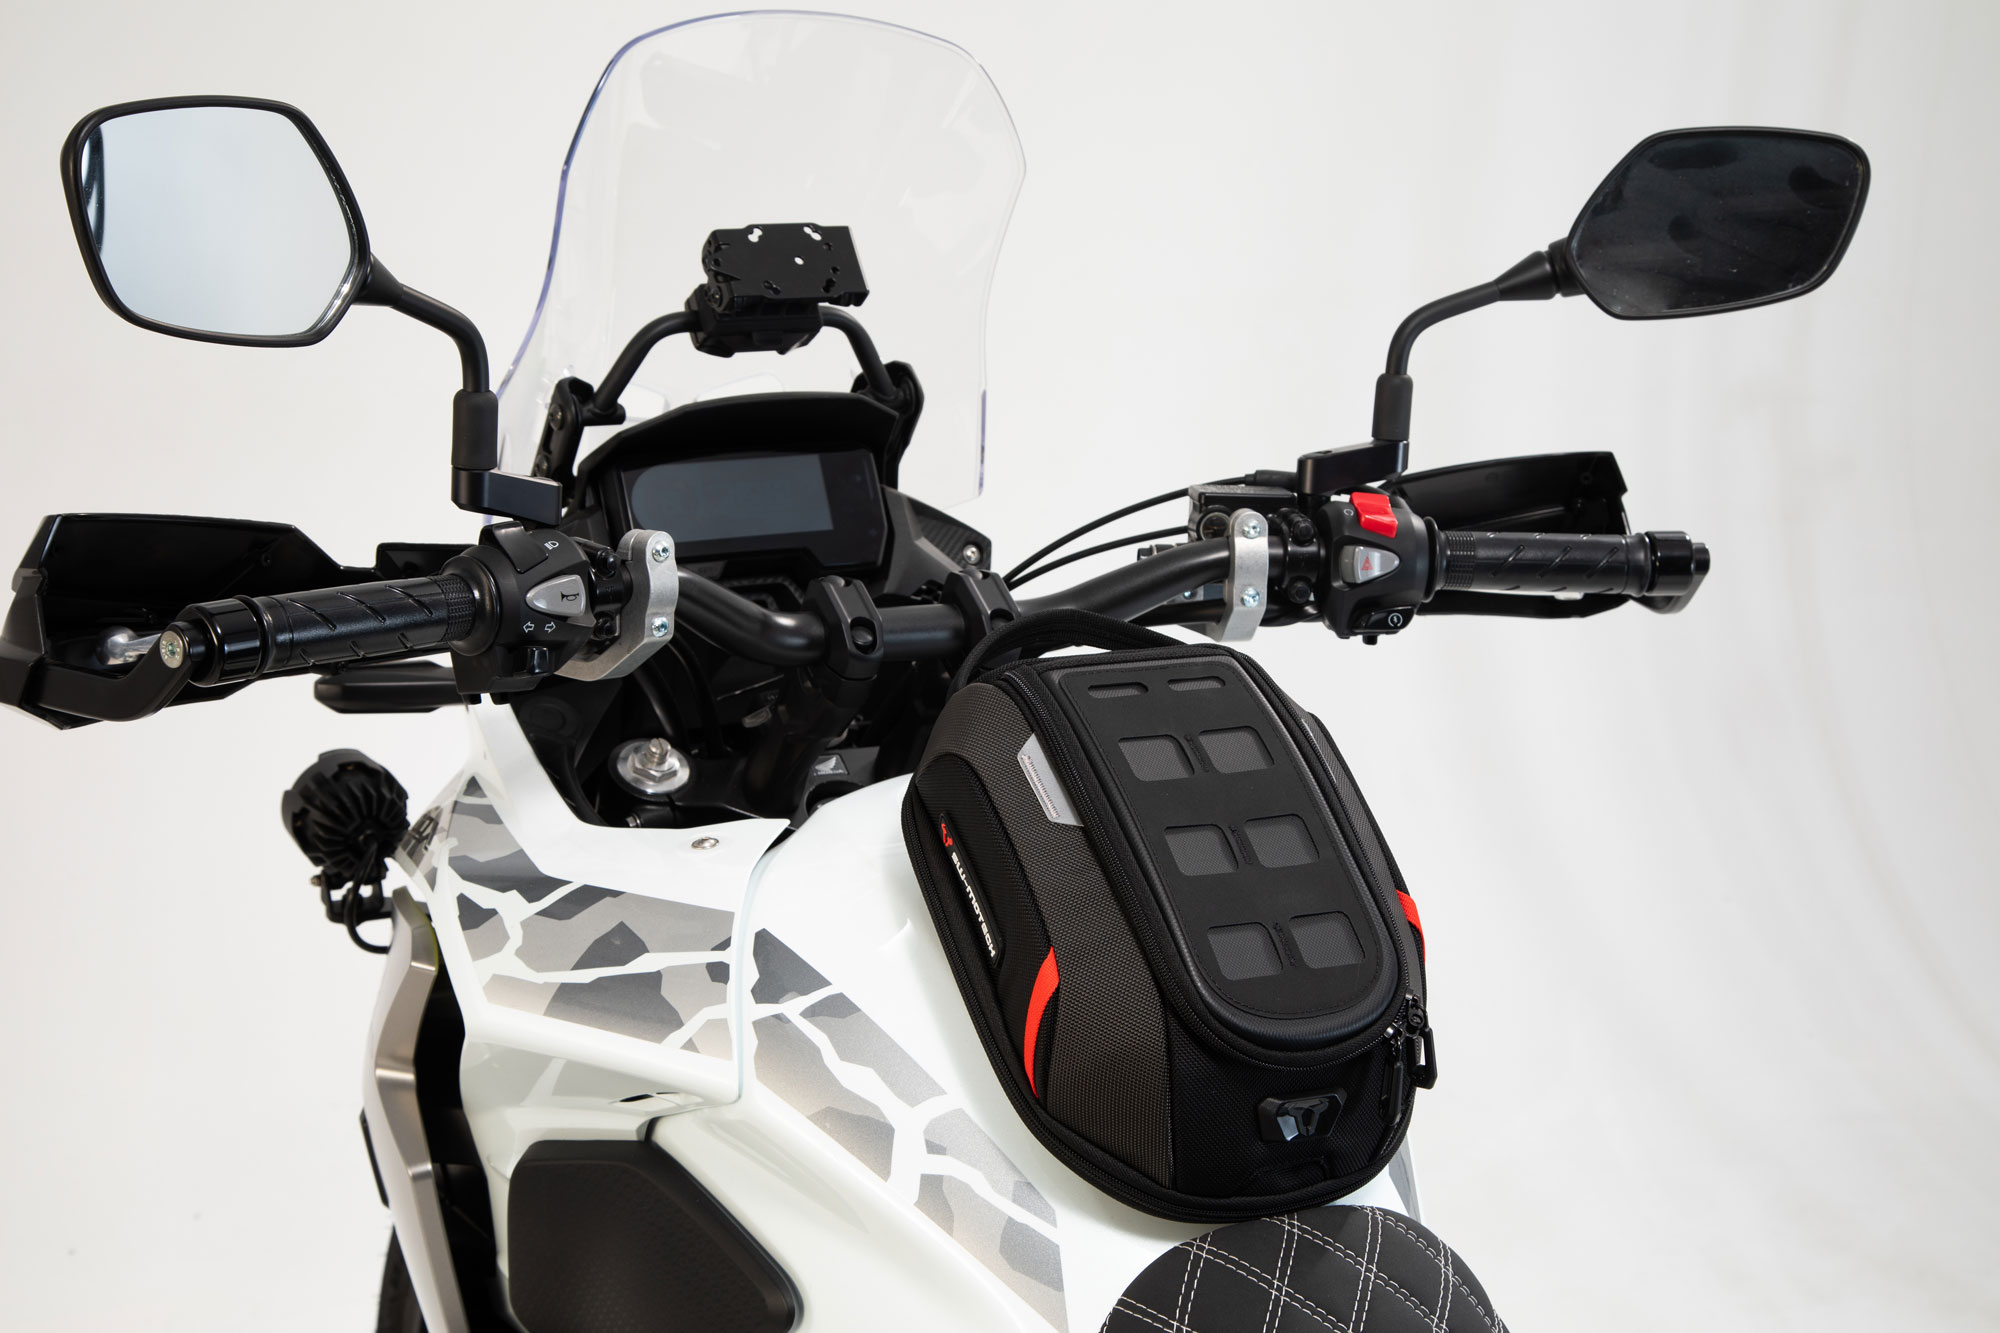 Honda CB500X: The BEST accessories for your motorcycle 